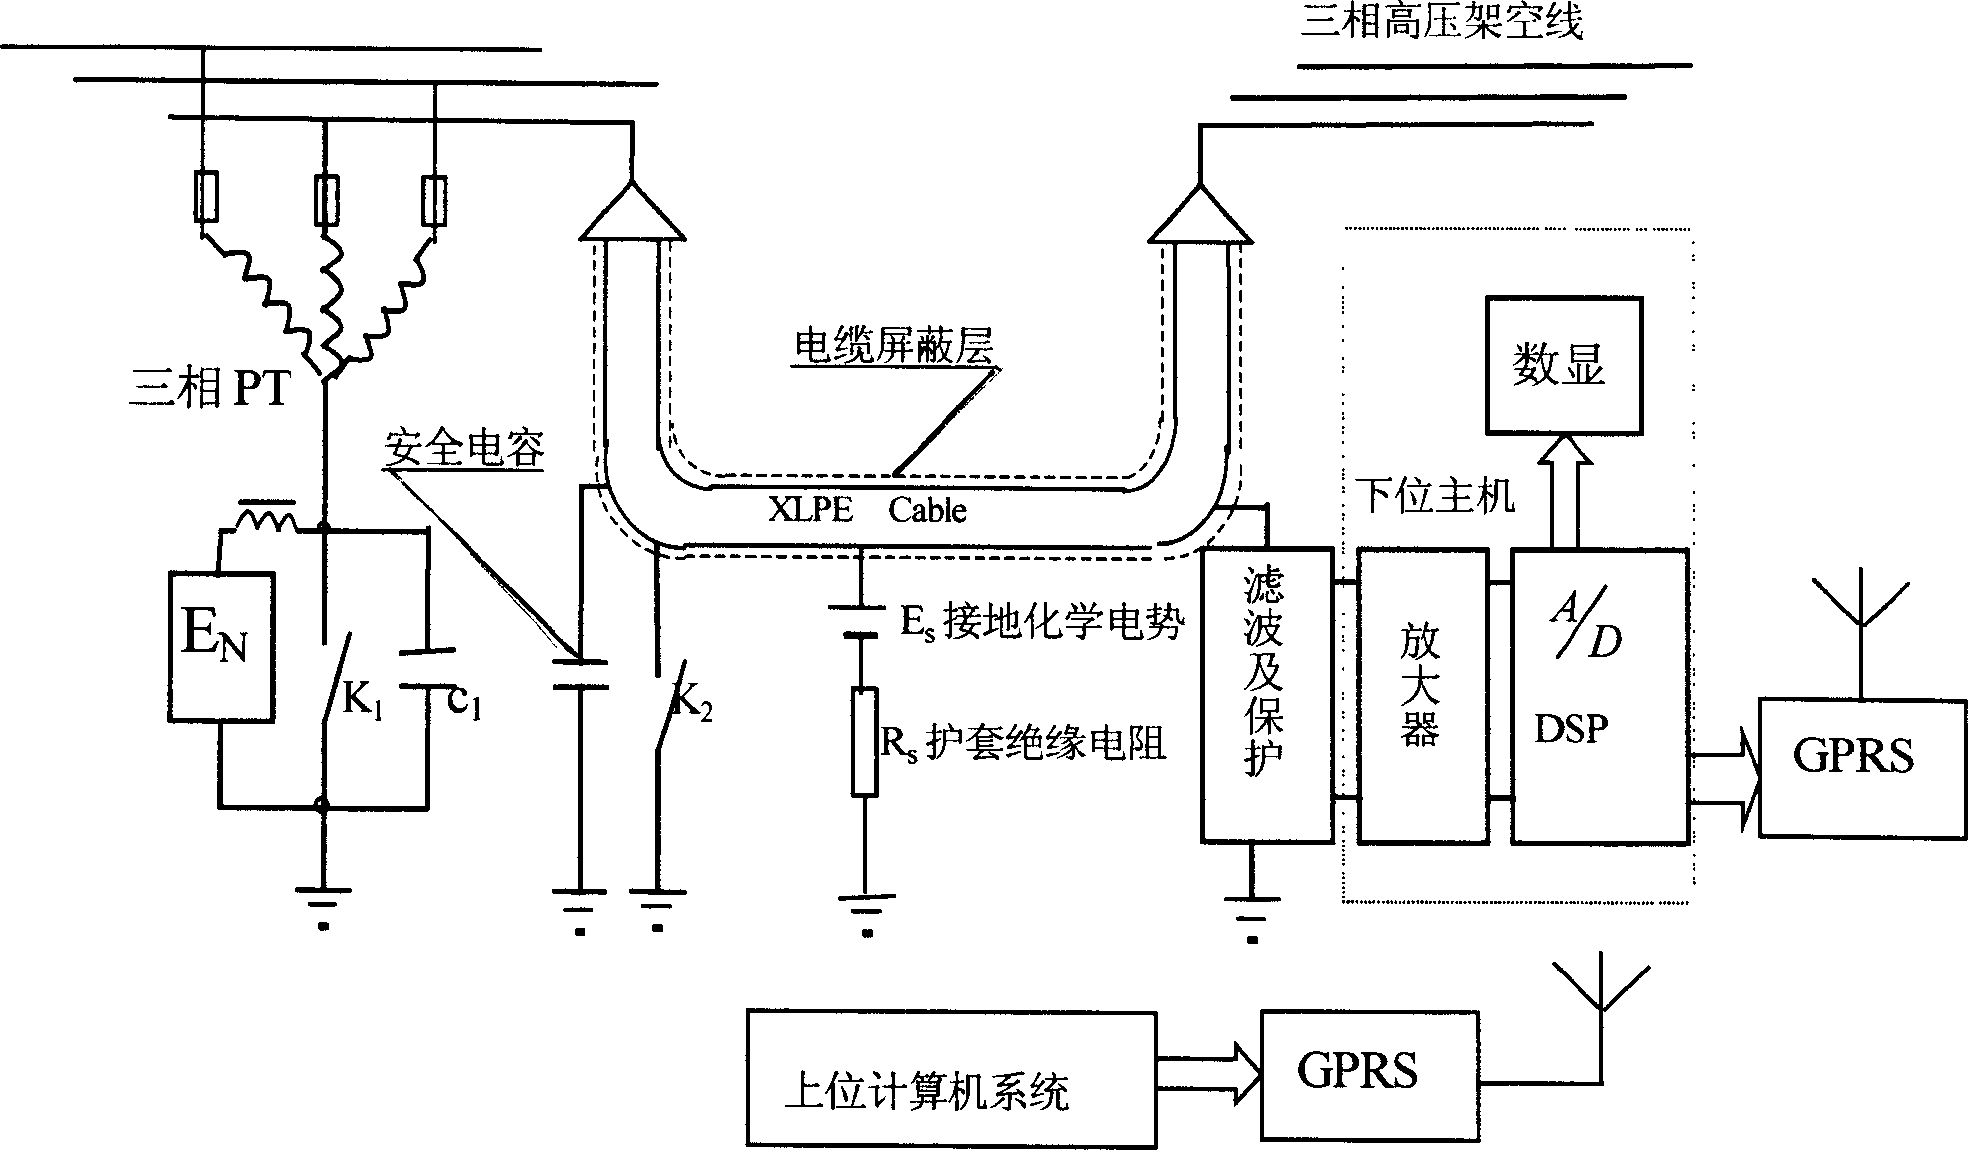 Insulating state on-line monitoring method of cross-linked PE cable